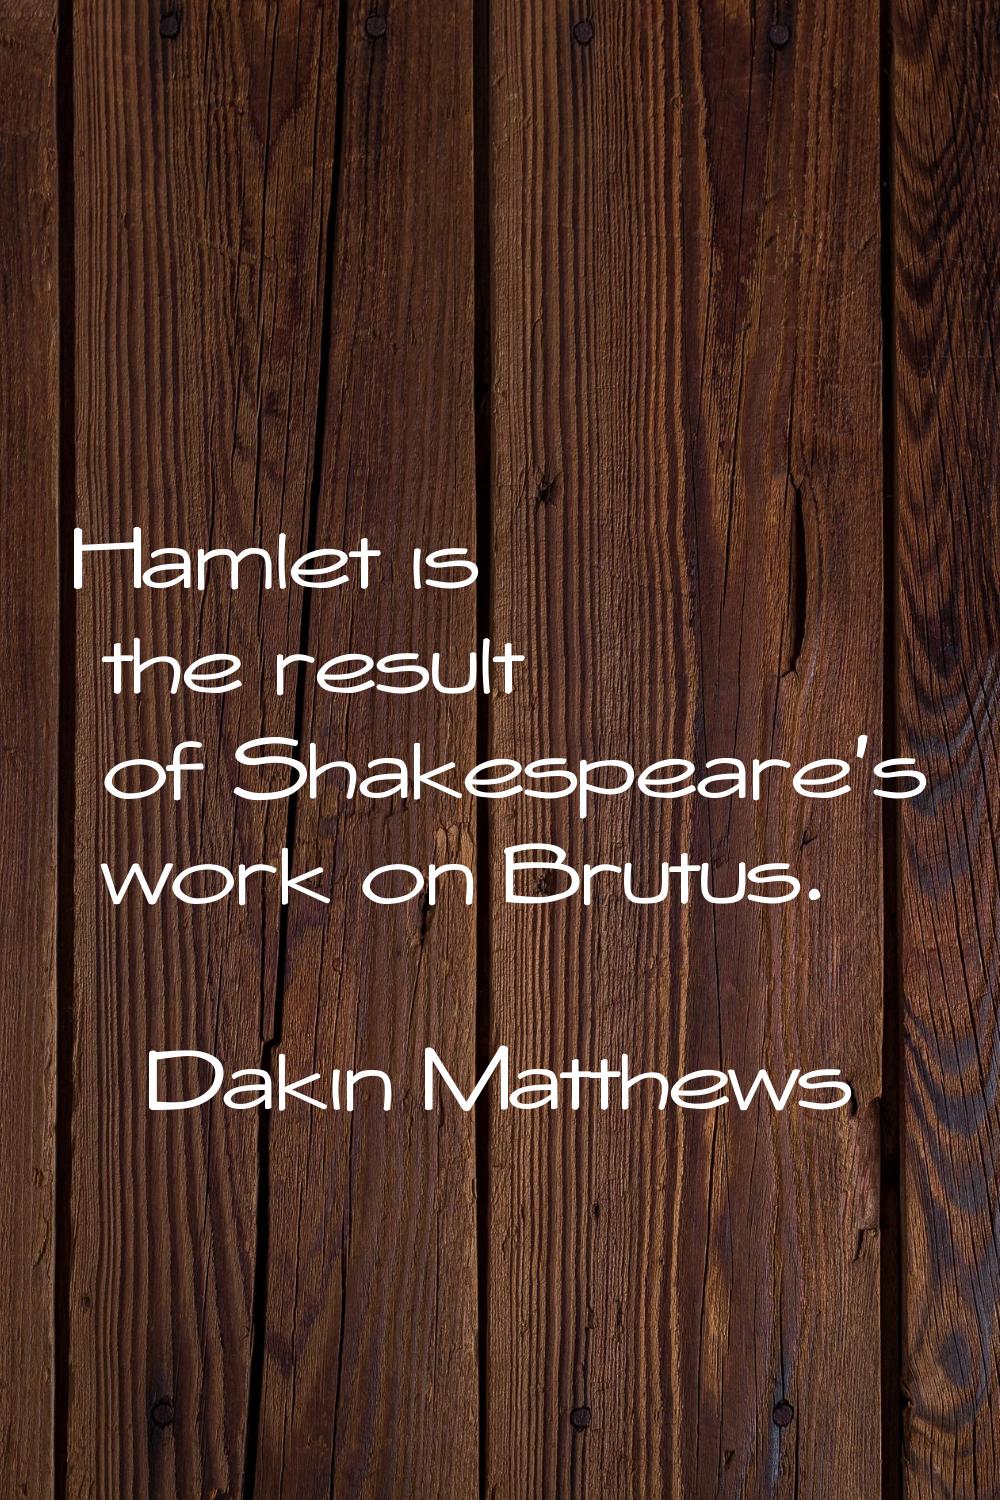 Hamlet is the result of Shakespeare's work on Brutus.